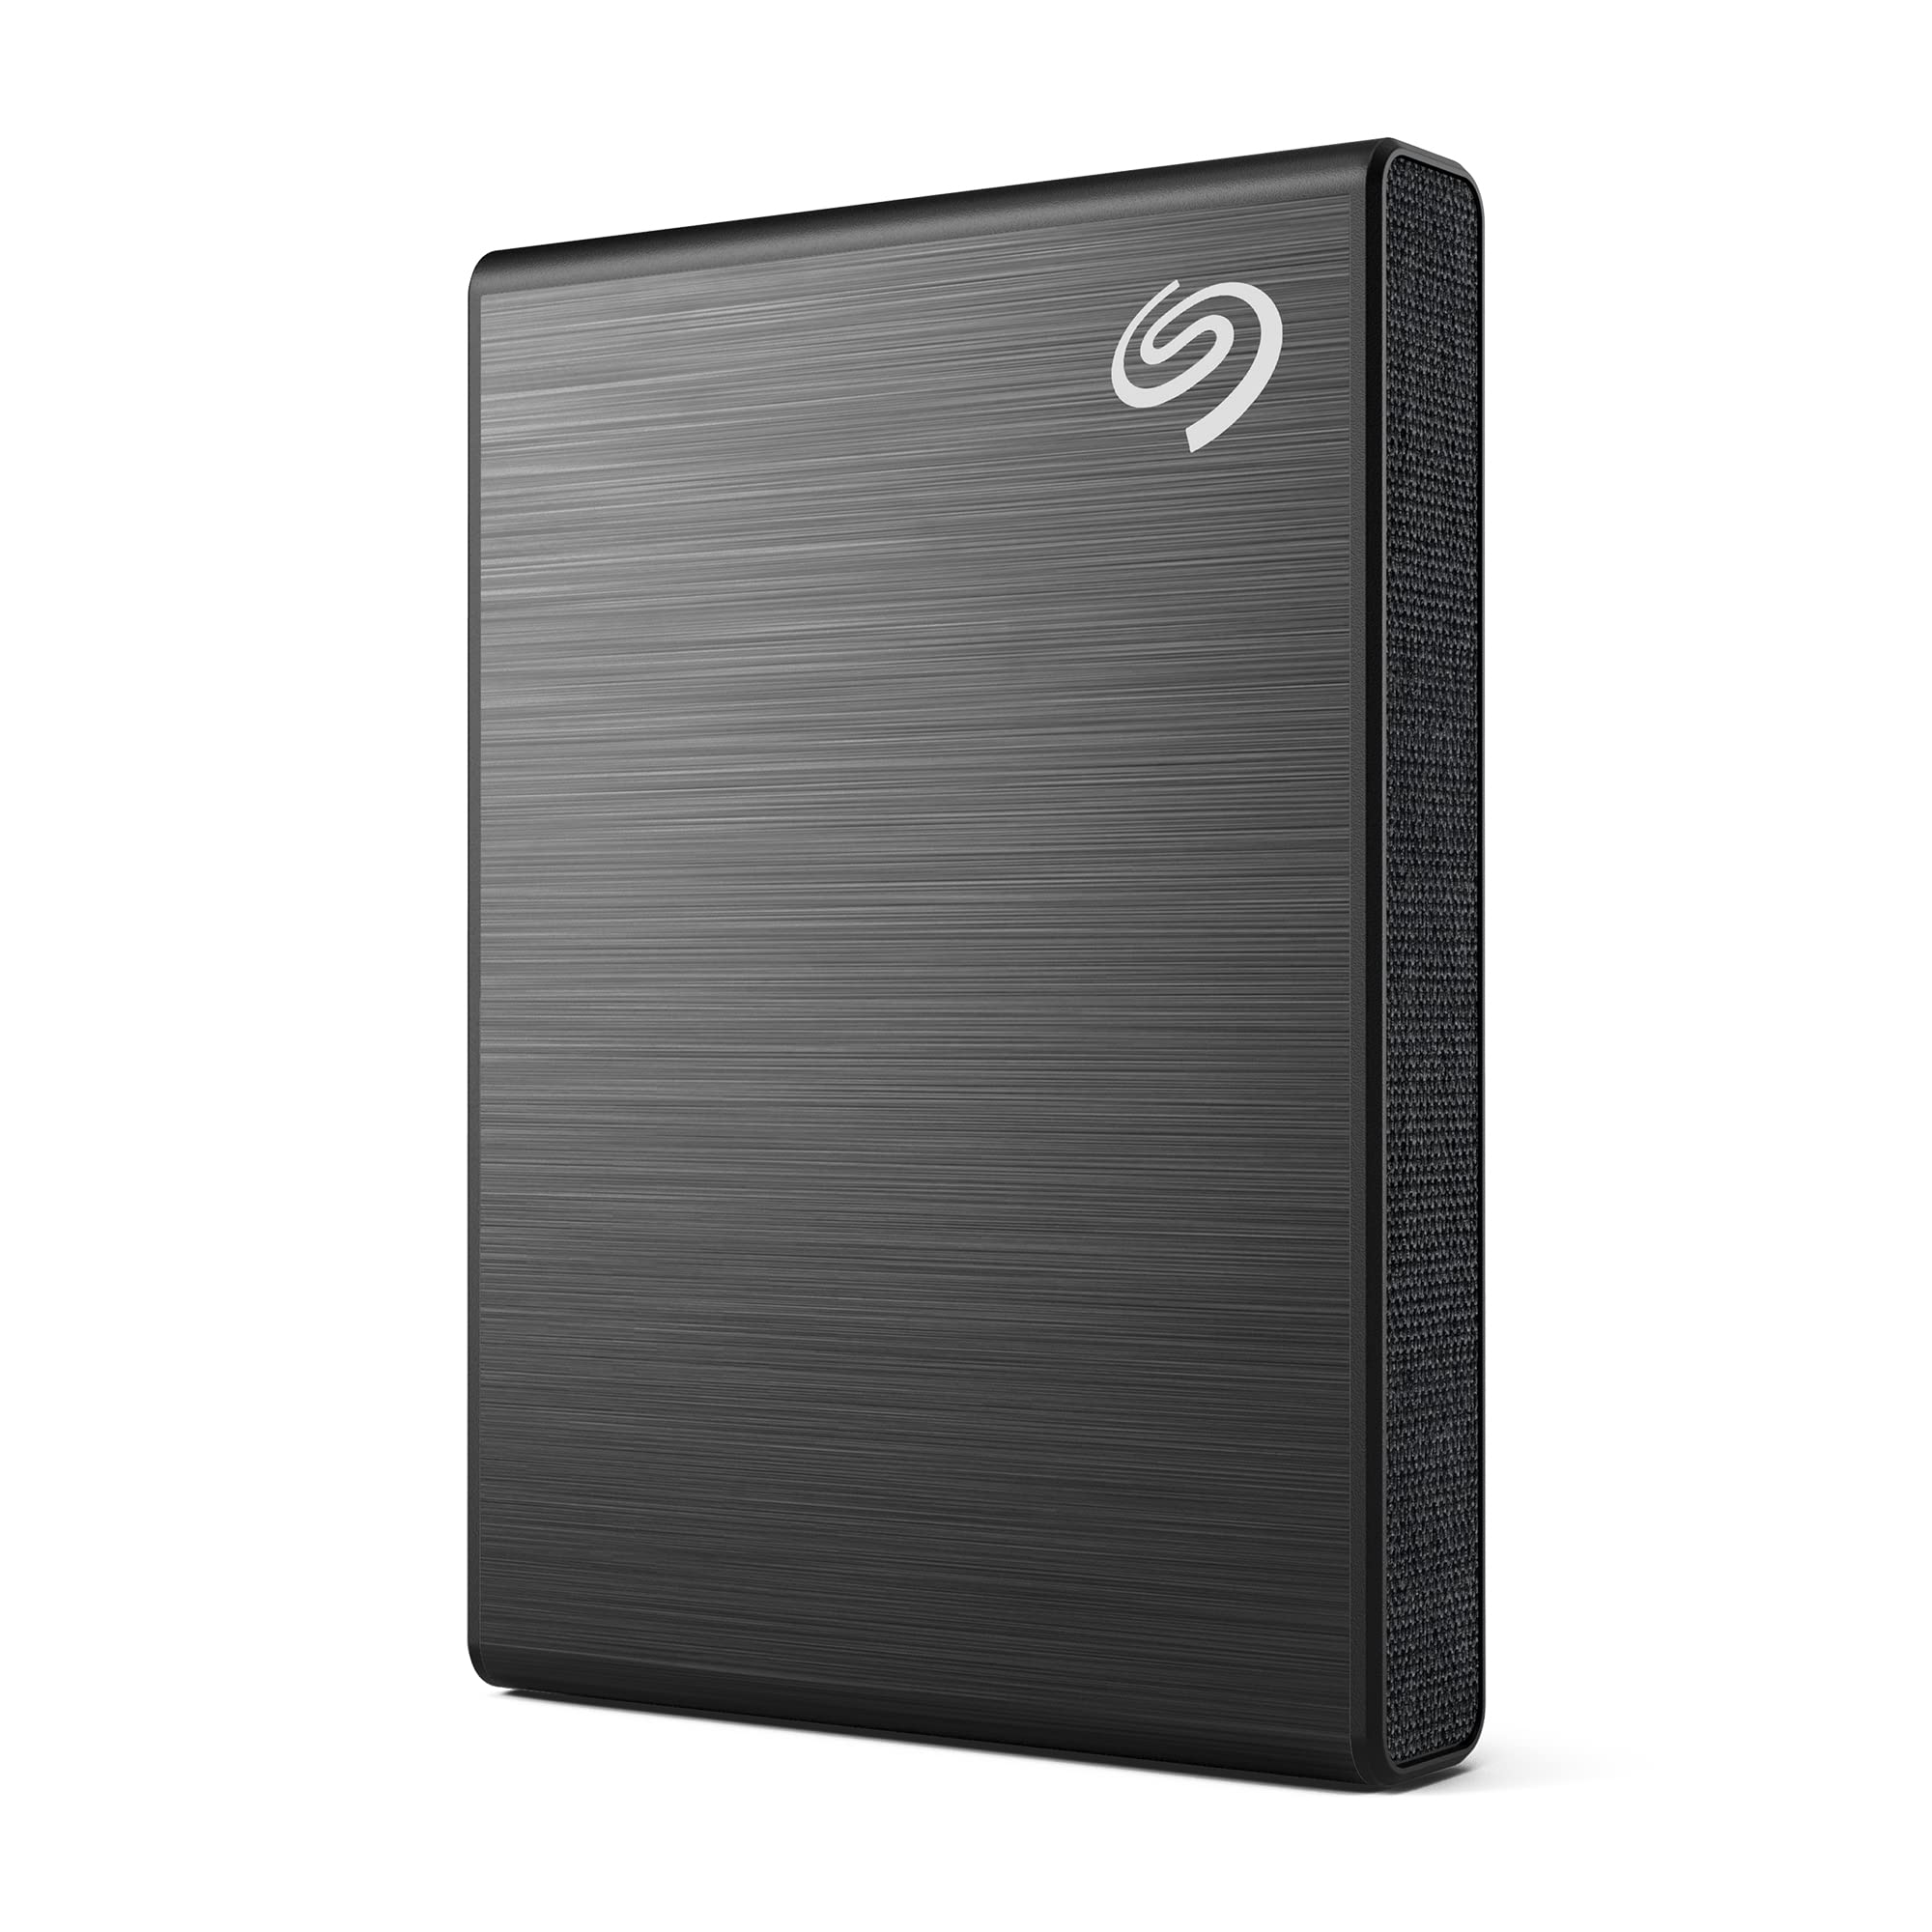 ONE TOUCH SSD 500GB BLACK 1.5IN